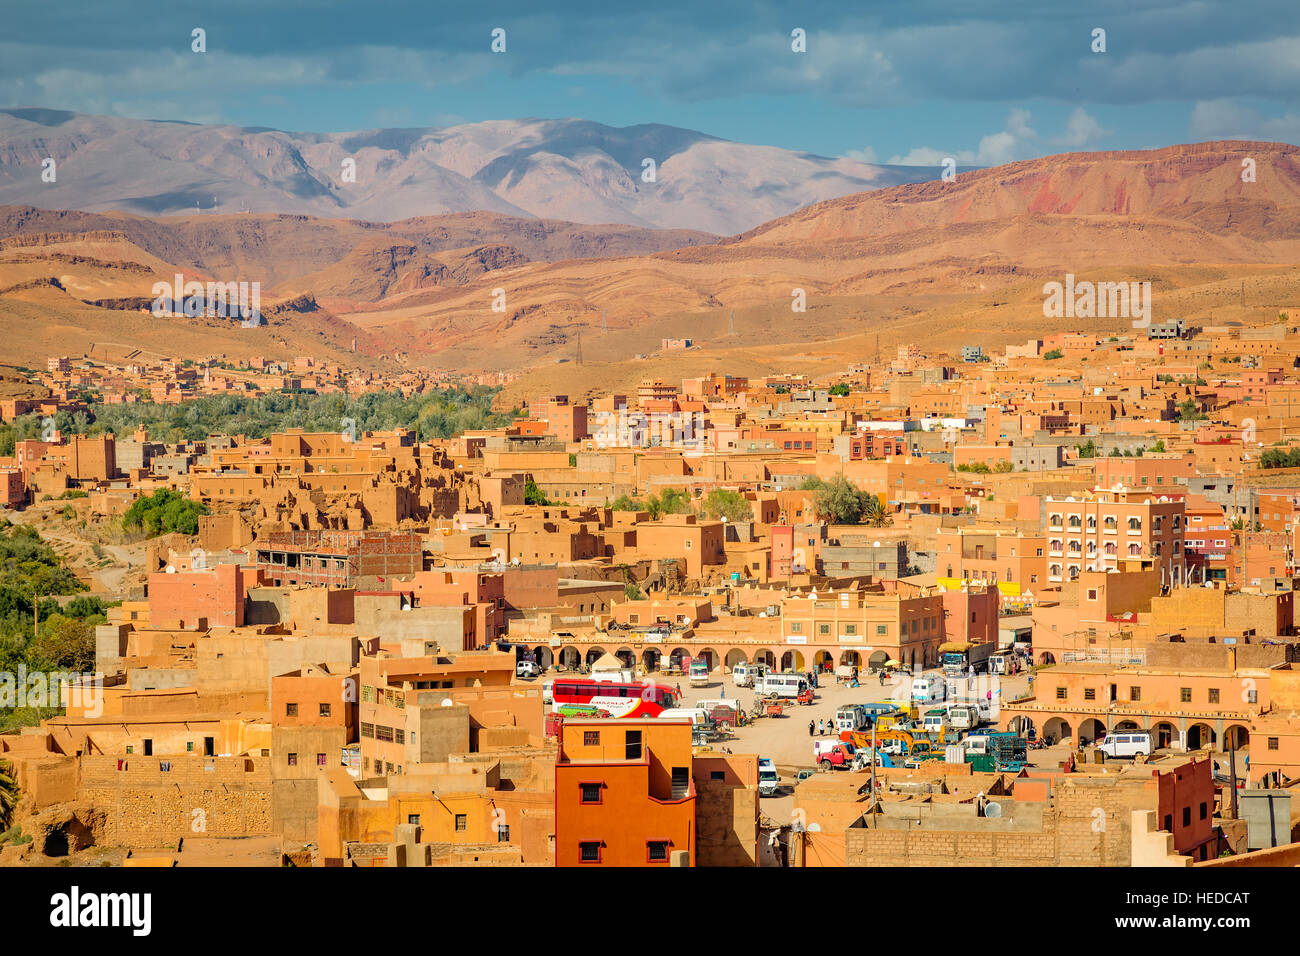 View of the valley with the city Boumalne Dades in Morocco Stock Photo